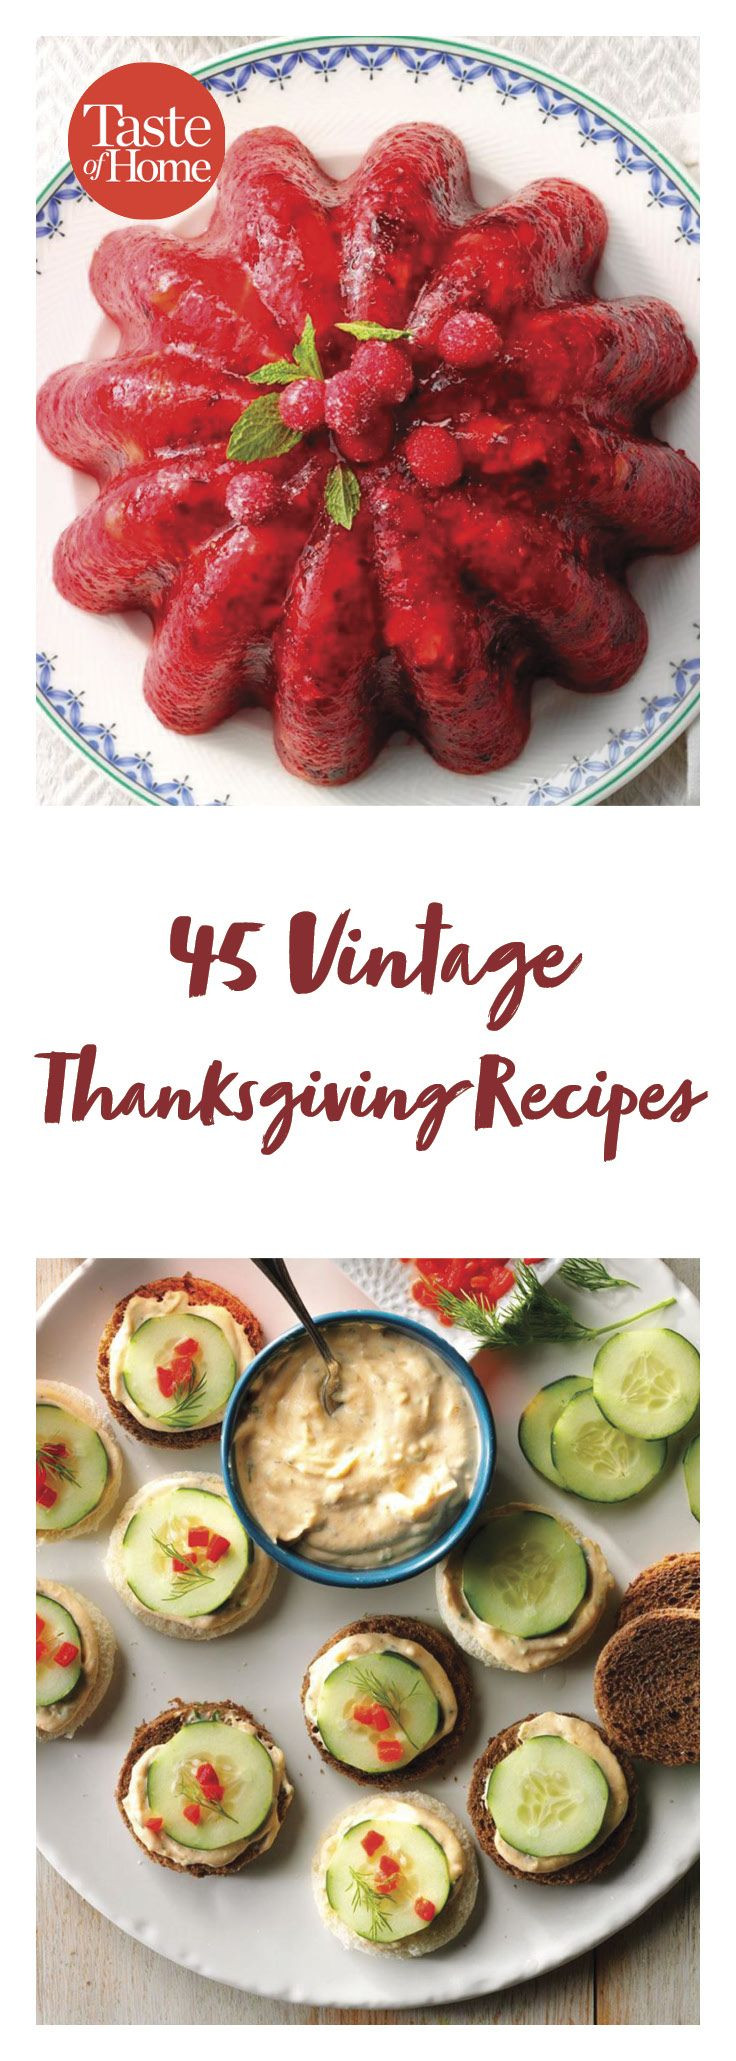 Thanksgiving 2019 Appetizers
 45 Vintage Inspired Thanksgiving Recipes in 2019